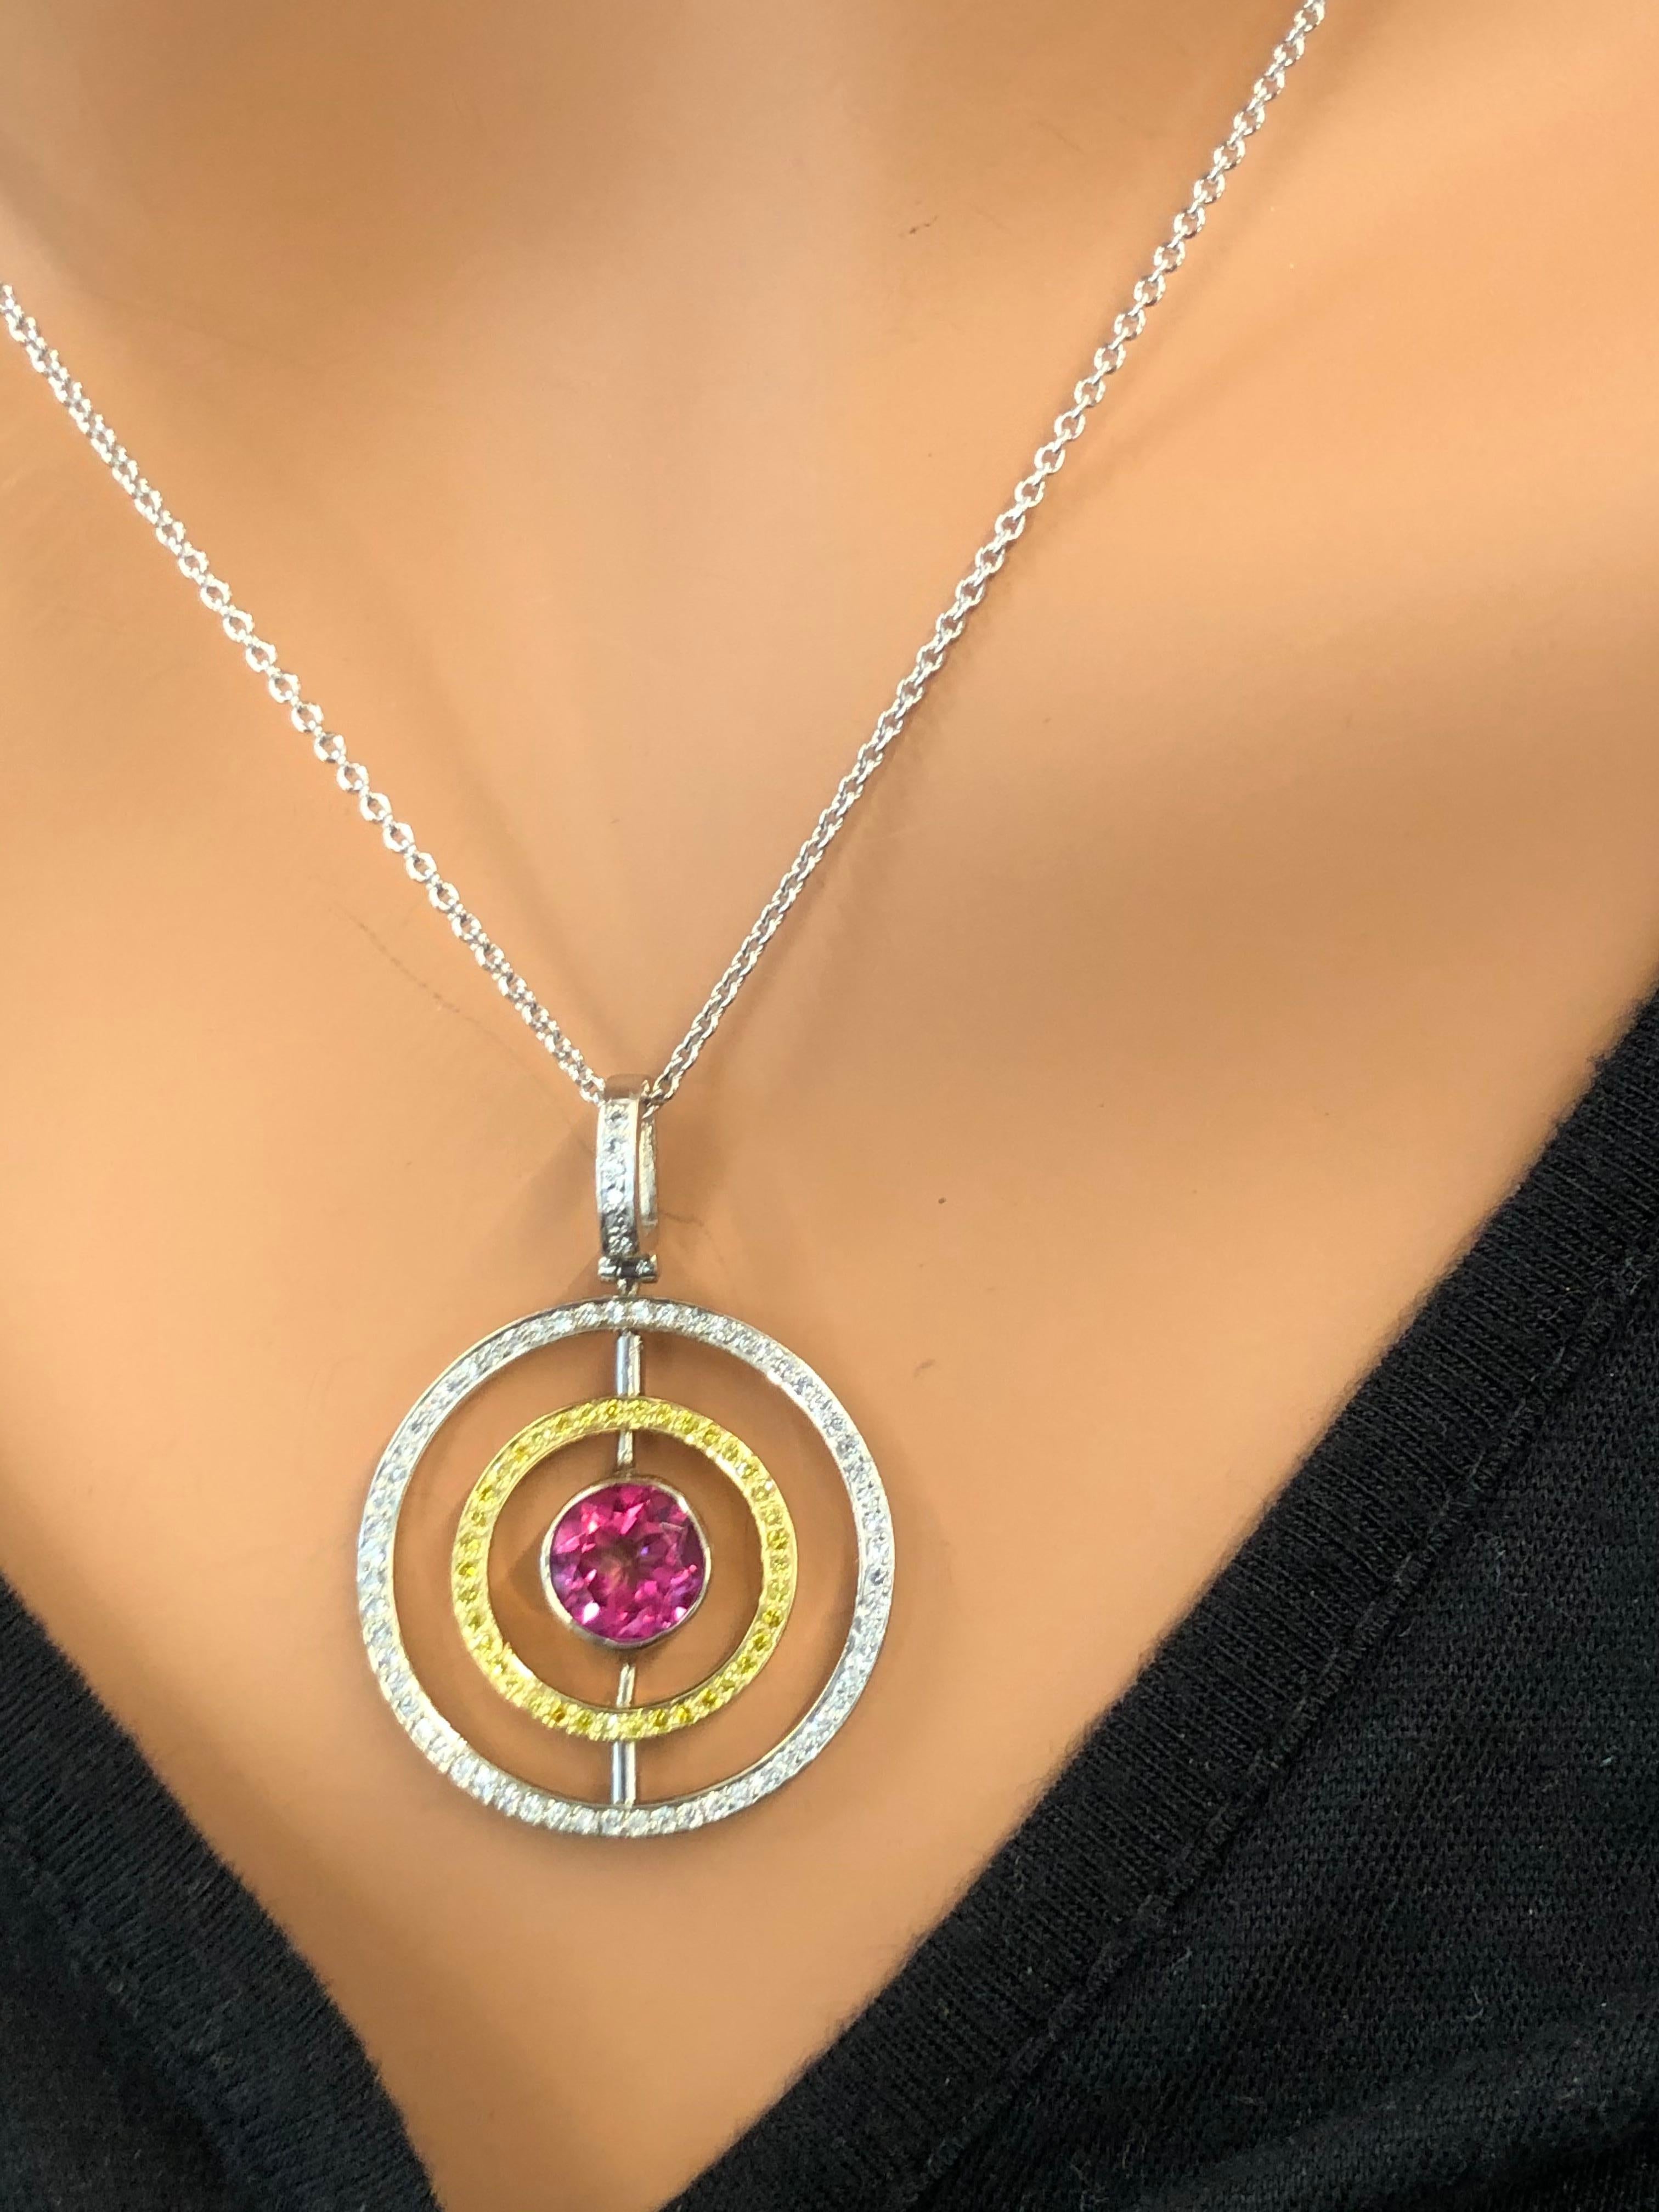 Designed in 18 karat two-tone gold, this modern eternity concentric circle pendant features a round brilliant cut raspberry pink tourmaline bezel set in the center. A total of 0.33 carat round brilliant white diamonds, 0.19 natural yellow diamonds,